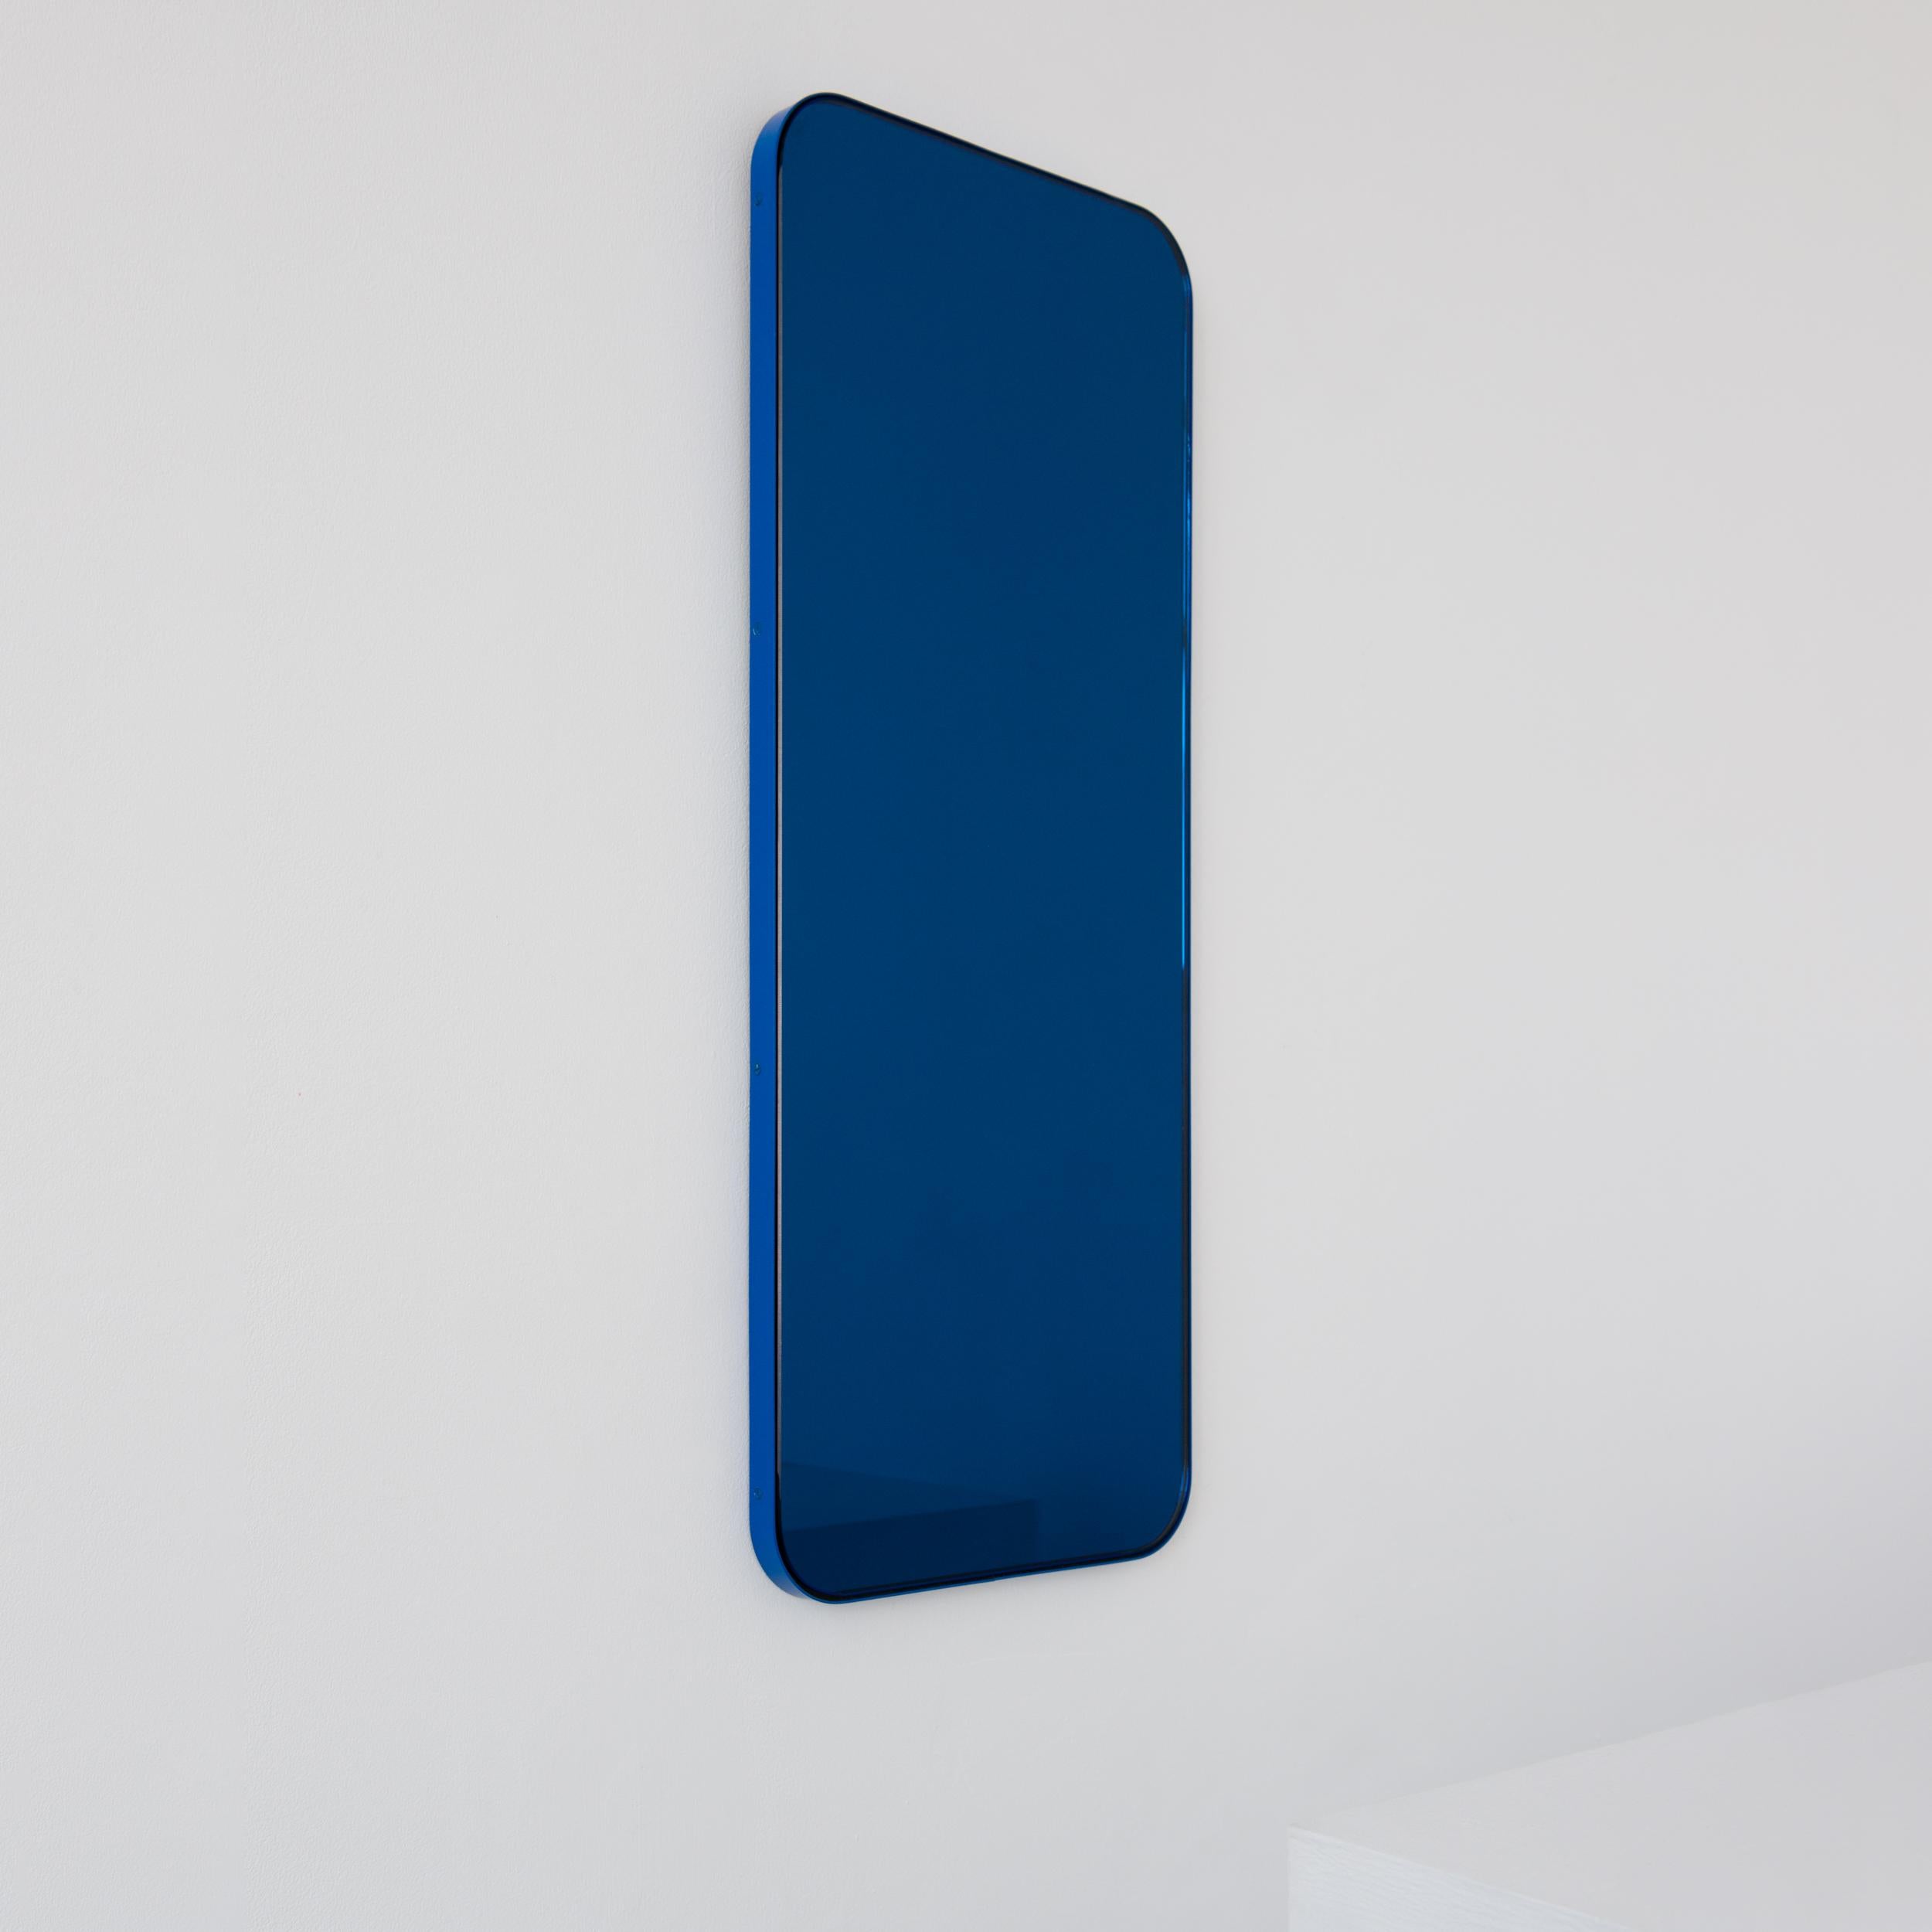 Powder-Coated In Stock Quadris Rectangular Blue Mirror, Blue Frame, Small For Sale